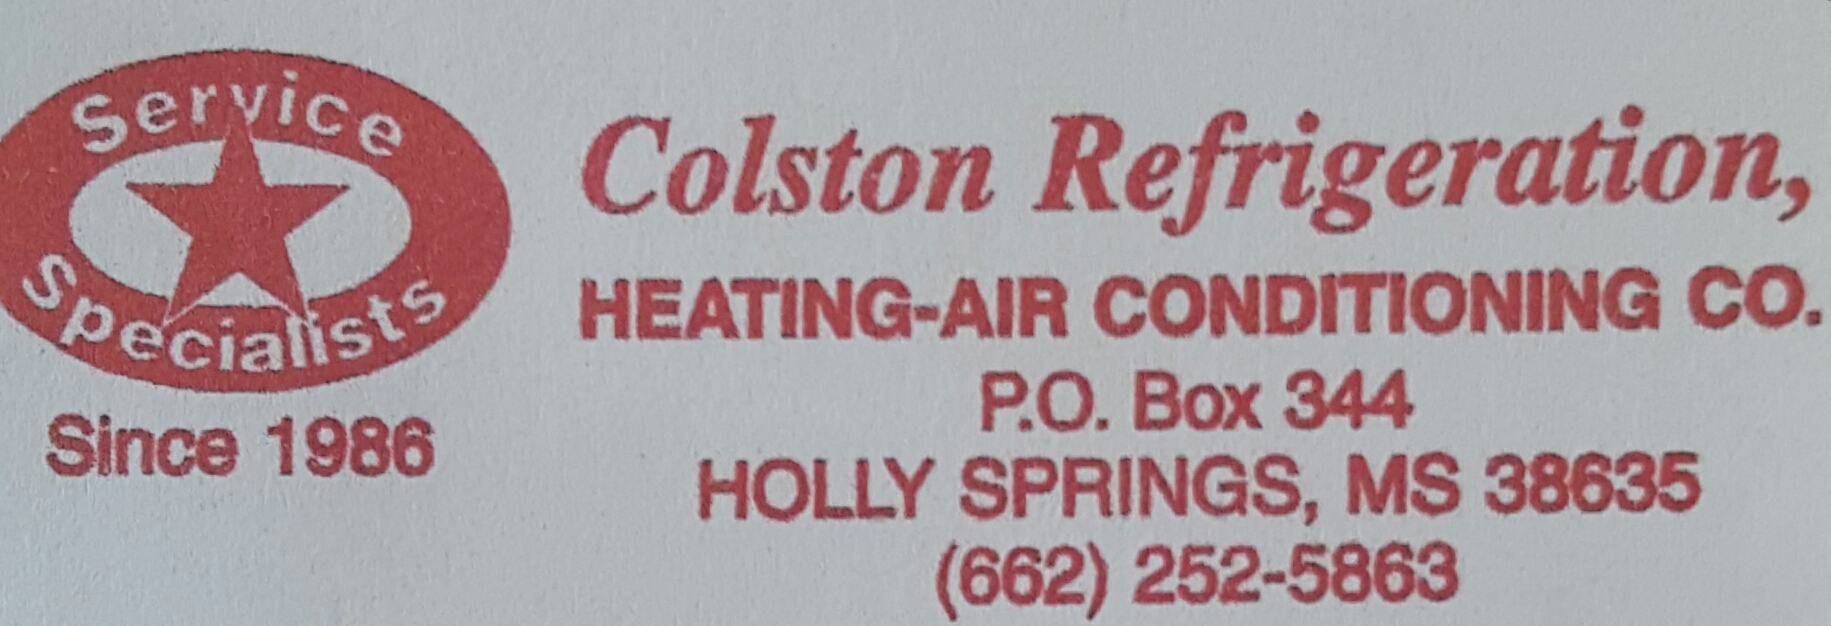 Colston Refrigeration, Heating & Air Conditioning Company 145 MS-4, Holly Springs Mississippi 38635